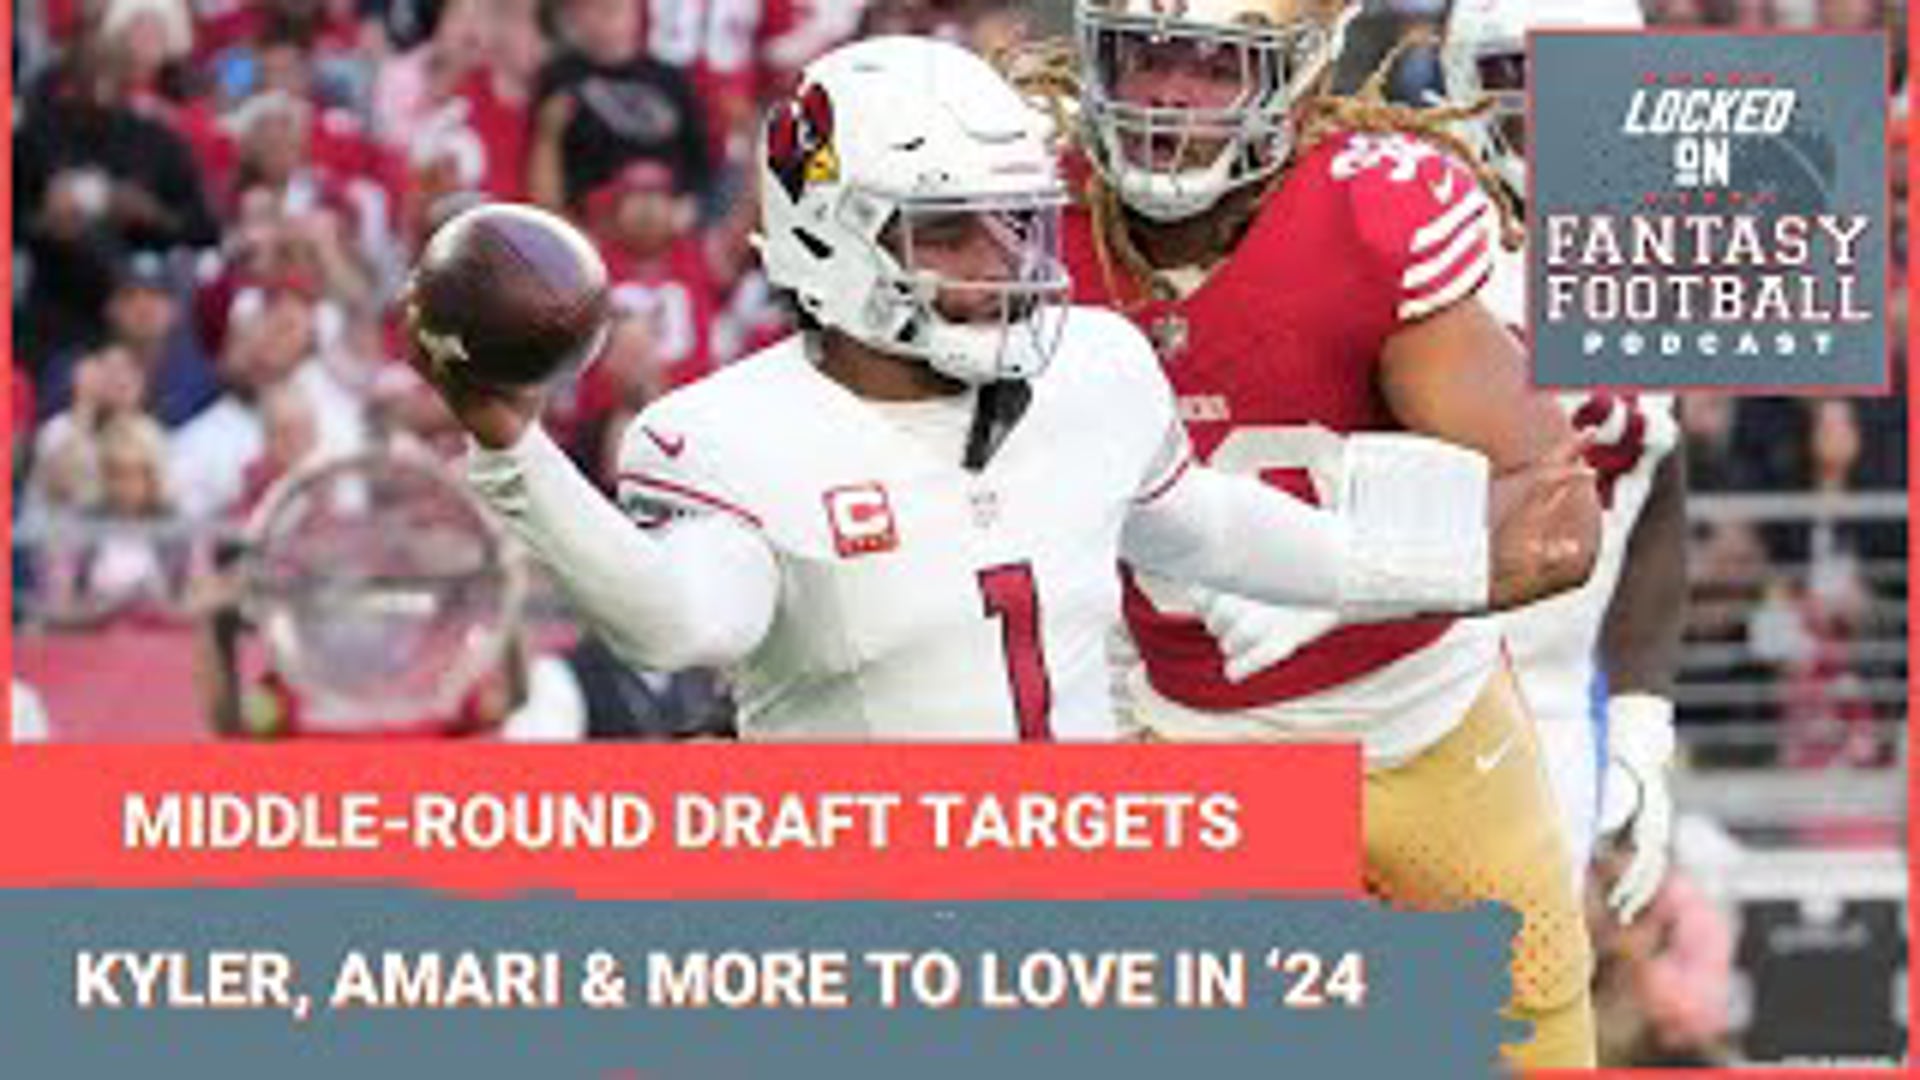 Sporting News.com's Vinnie Iyer and NFL.com's Michelle Magdziuk  each pick three of their favorite middle-round fantasy football draft targets for the 2024 season.